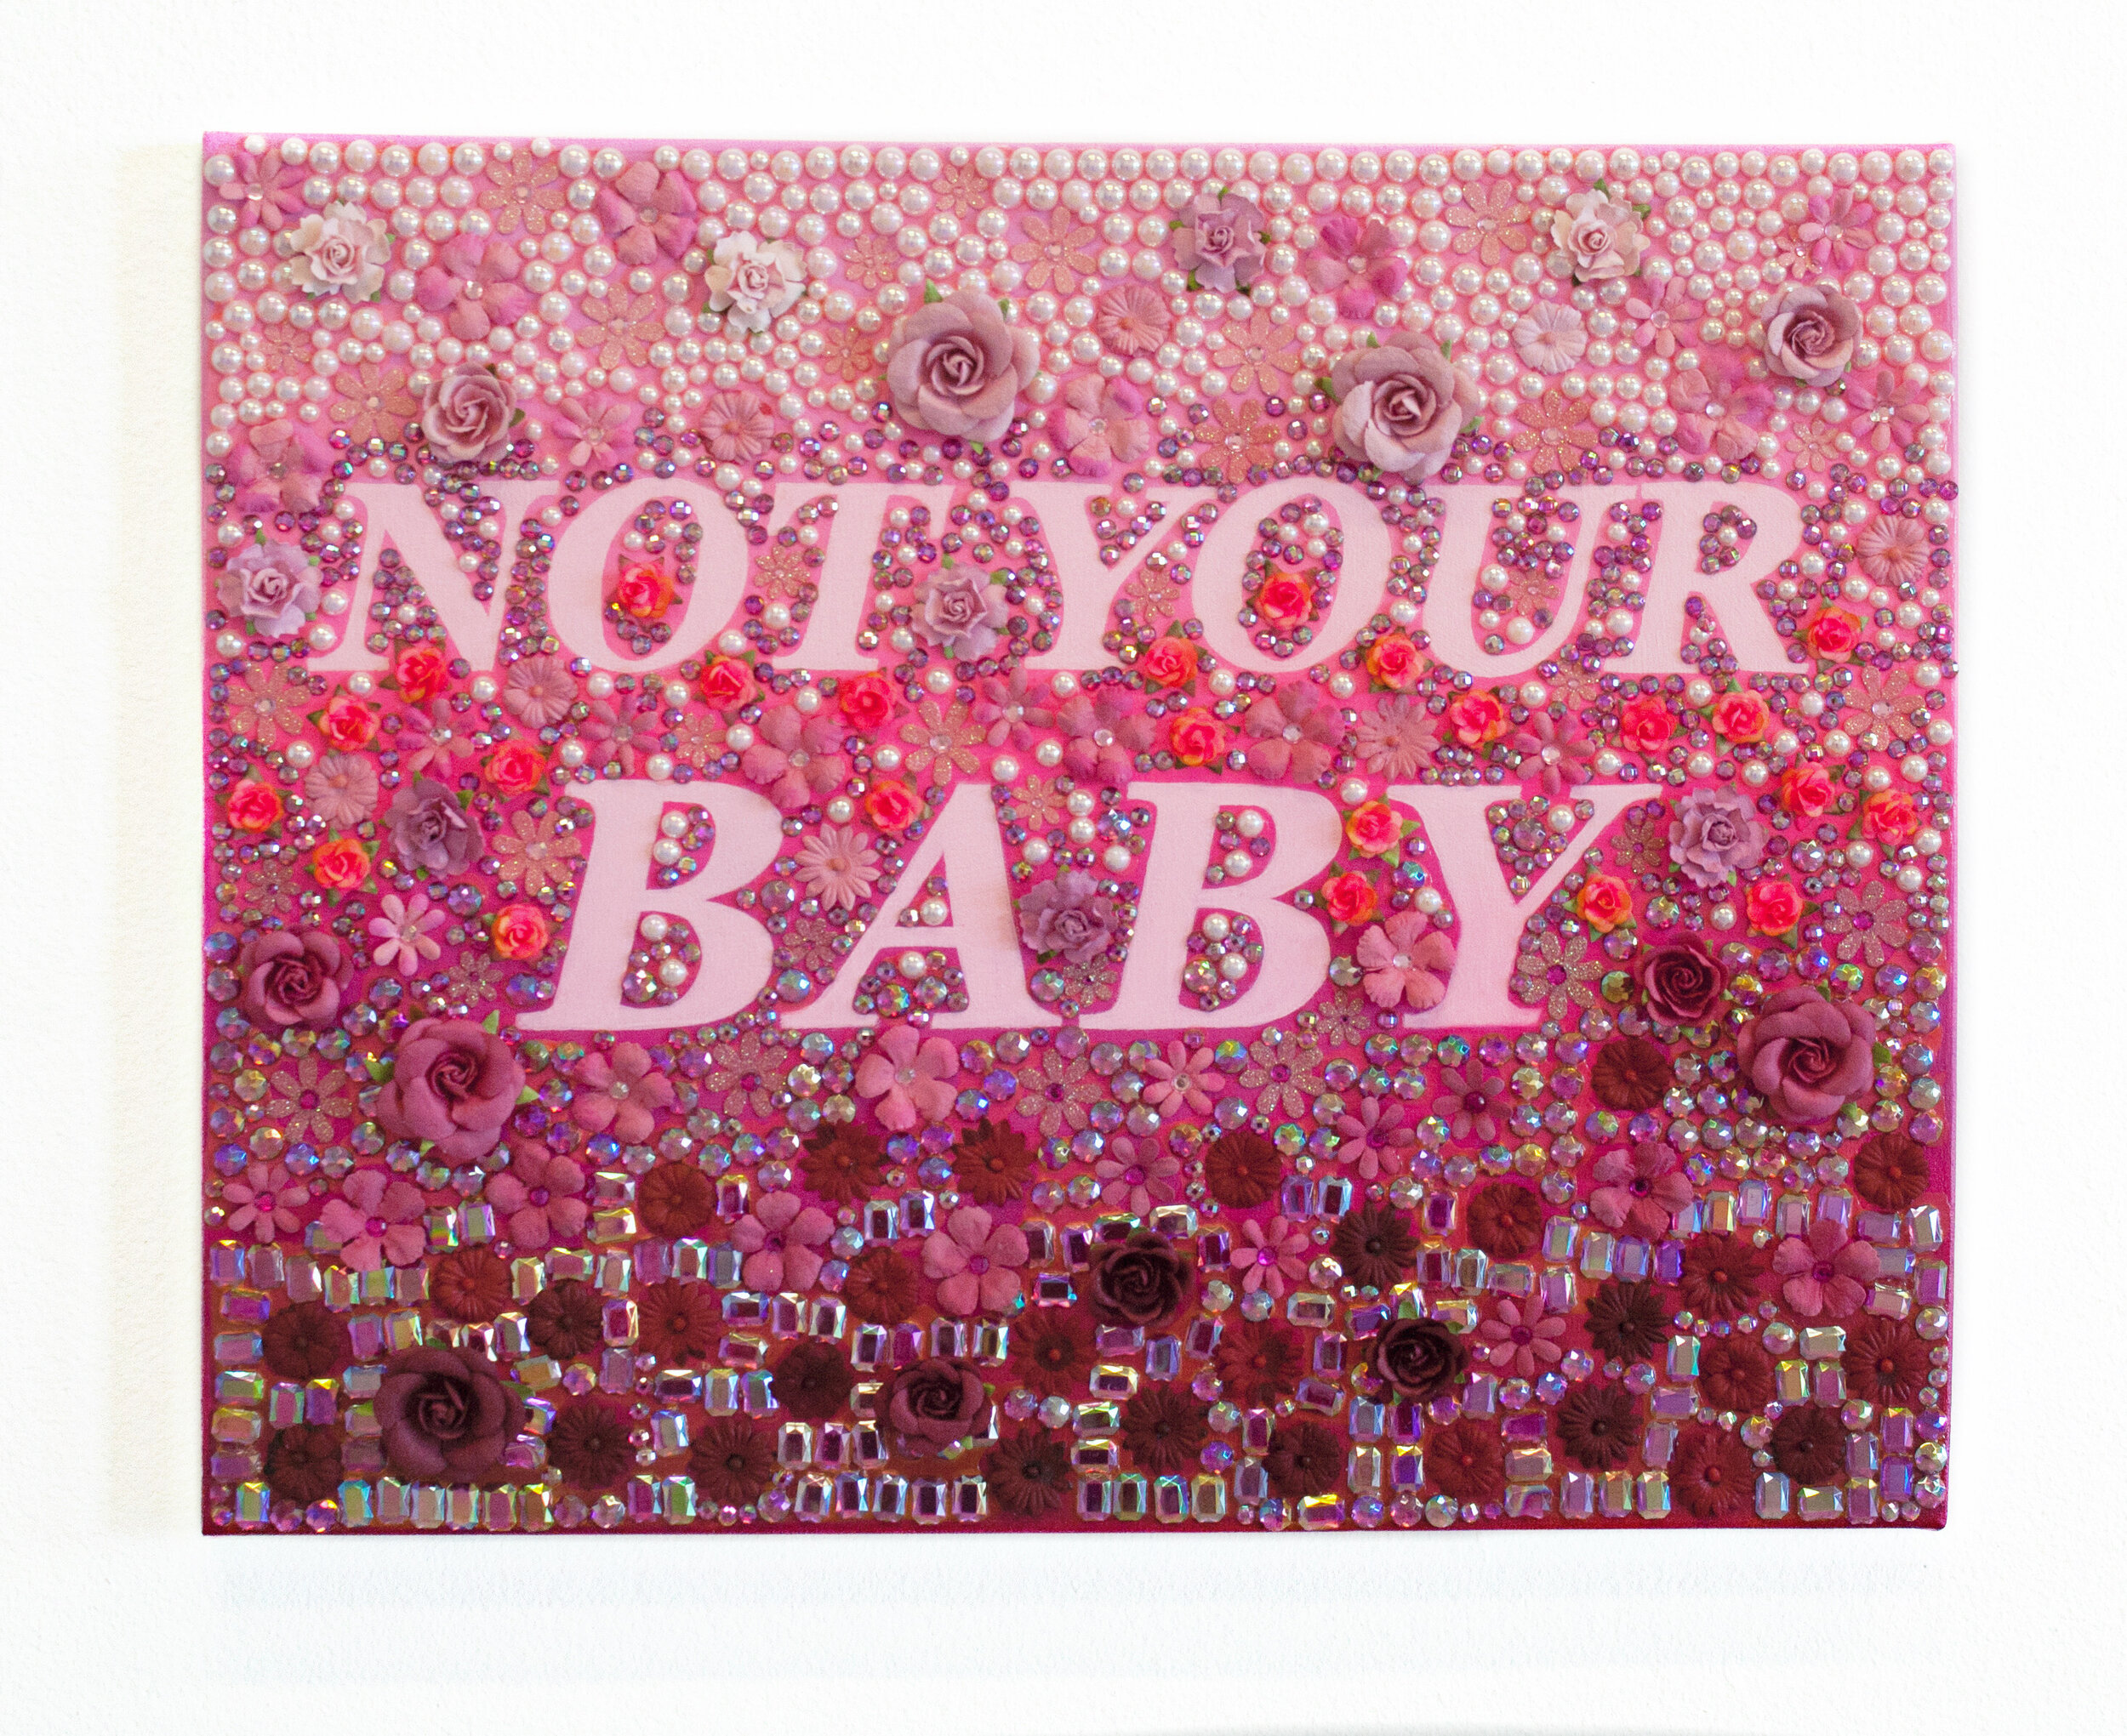 Not Your Baby